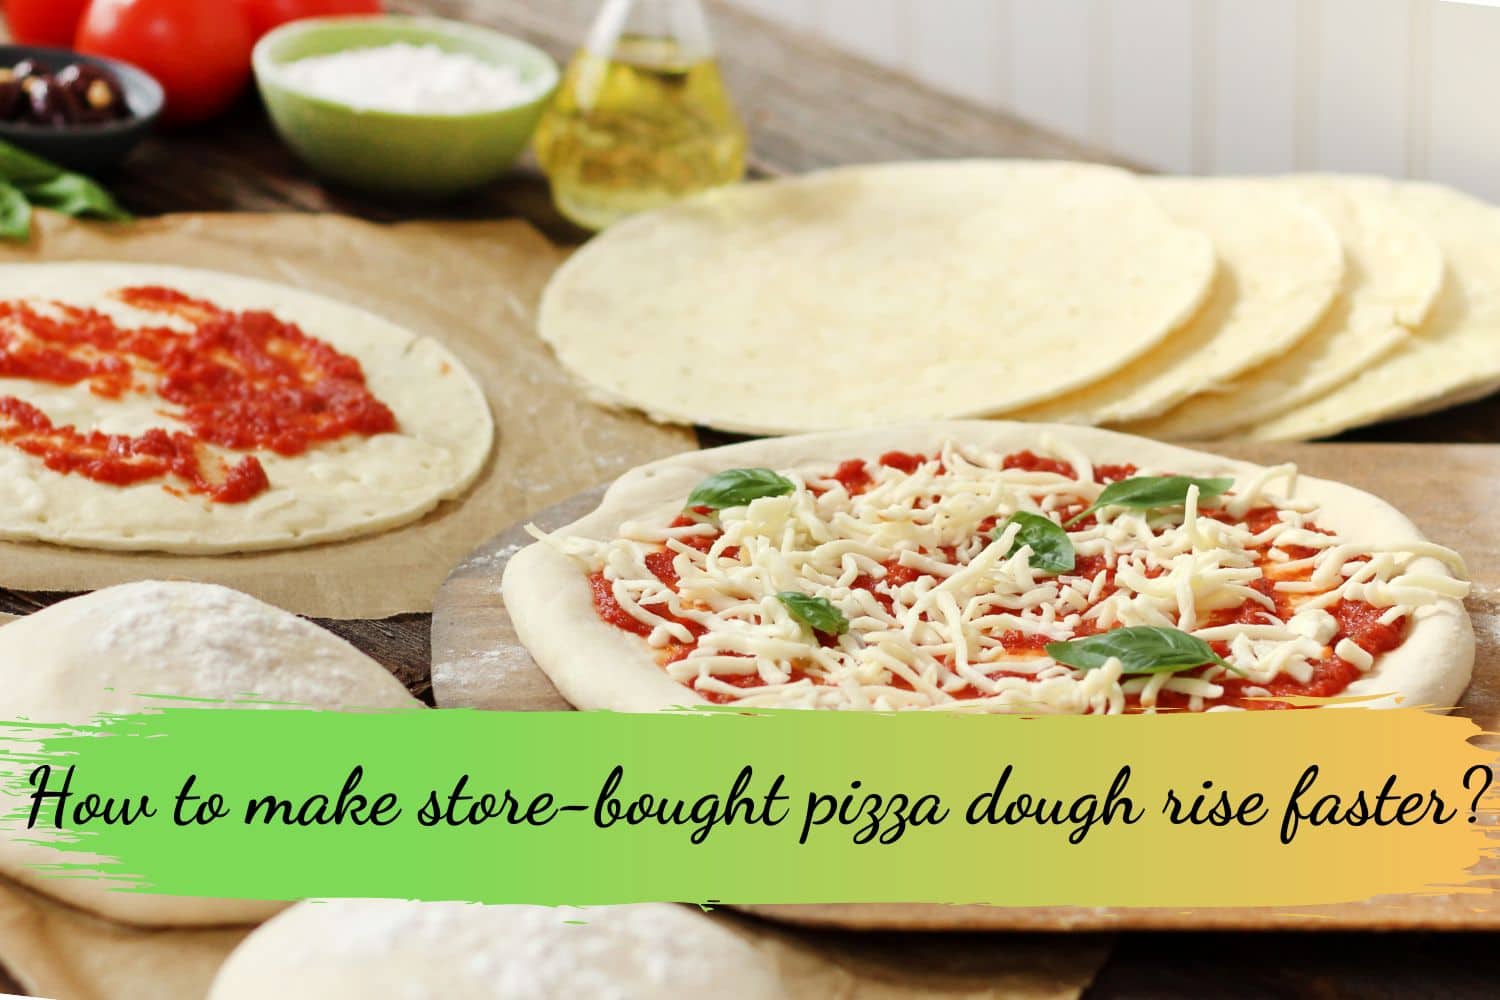 How to make store-bought pizza dough rise faster?